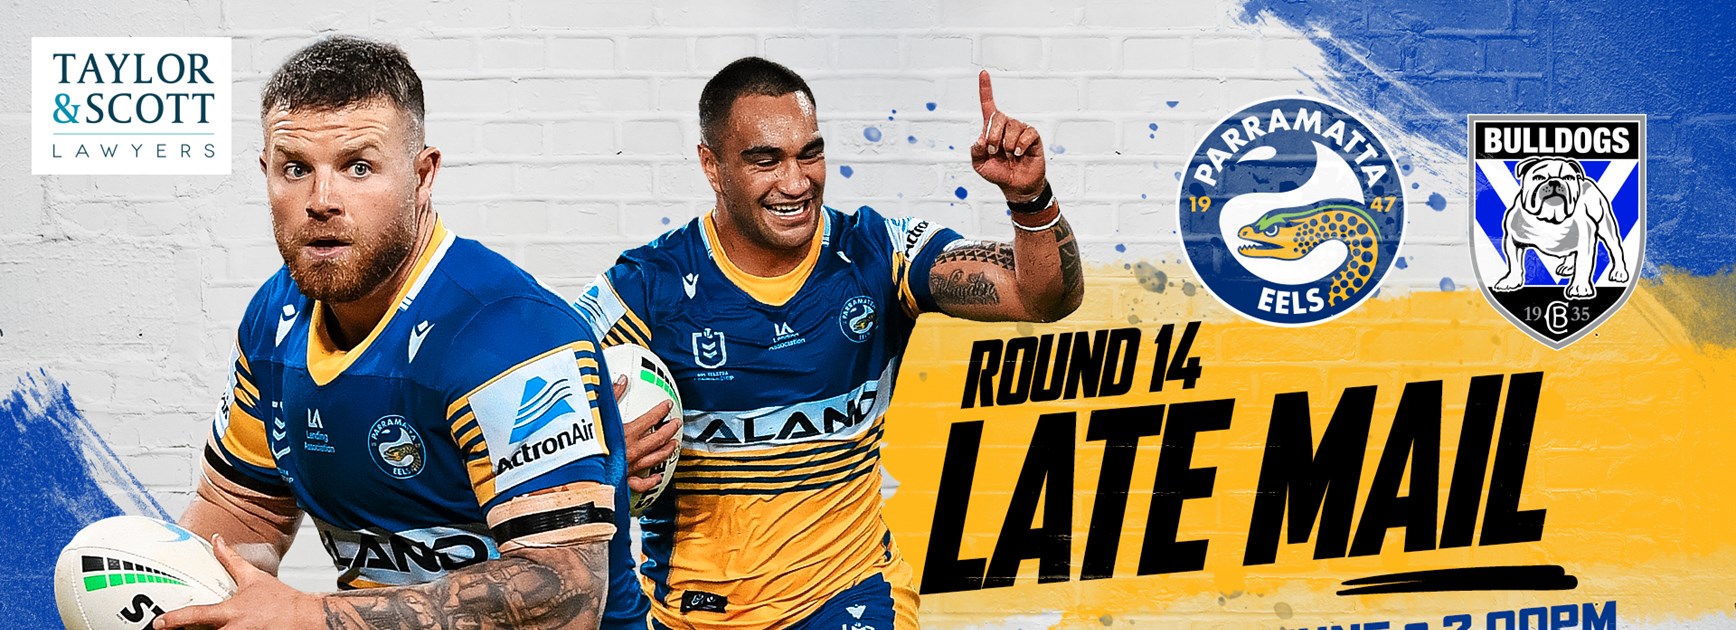 Late Mail - Eels v Bulldogs Round 15